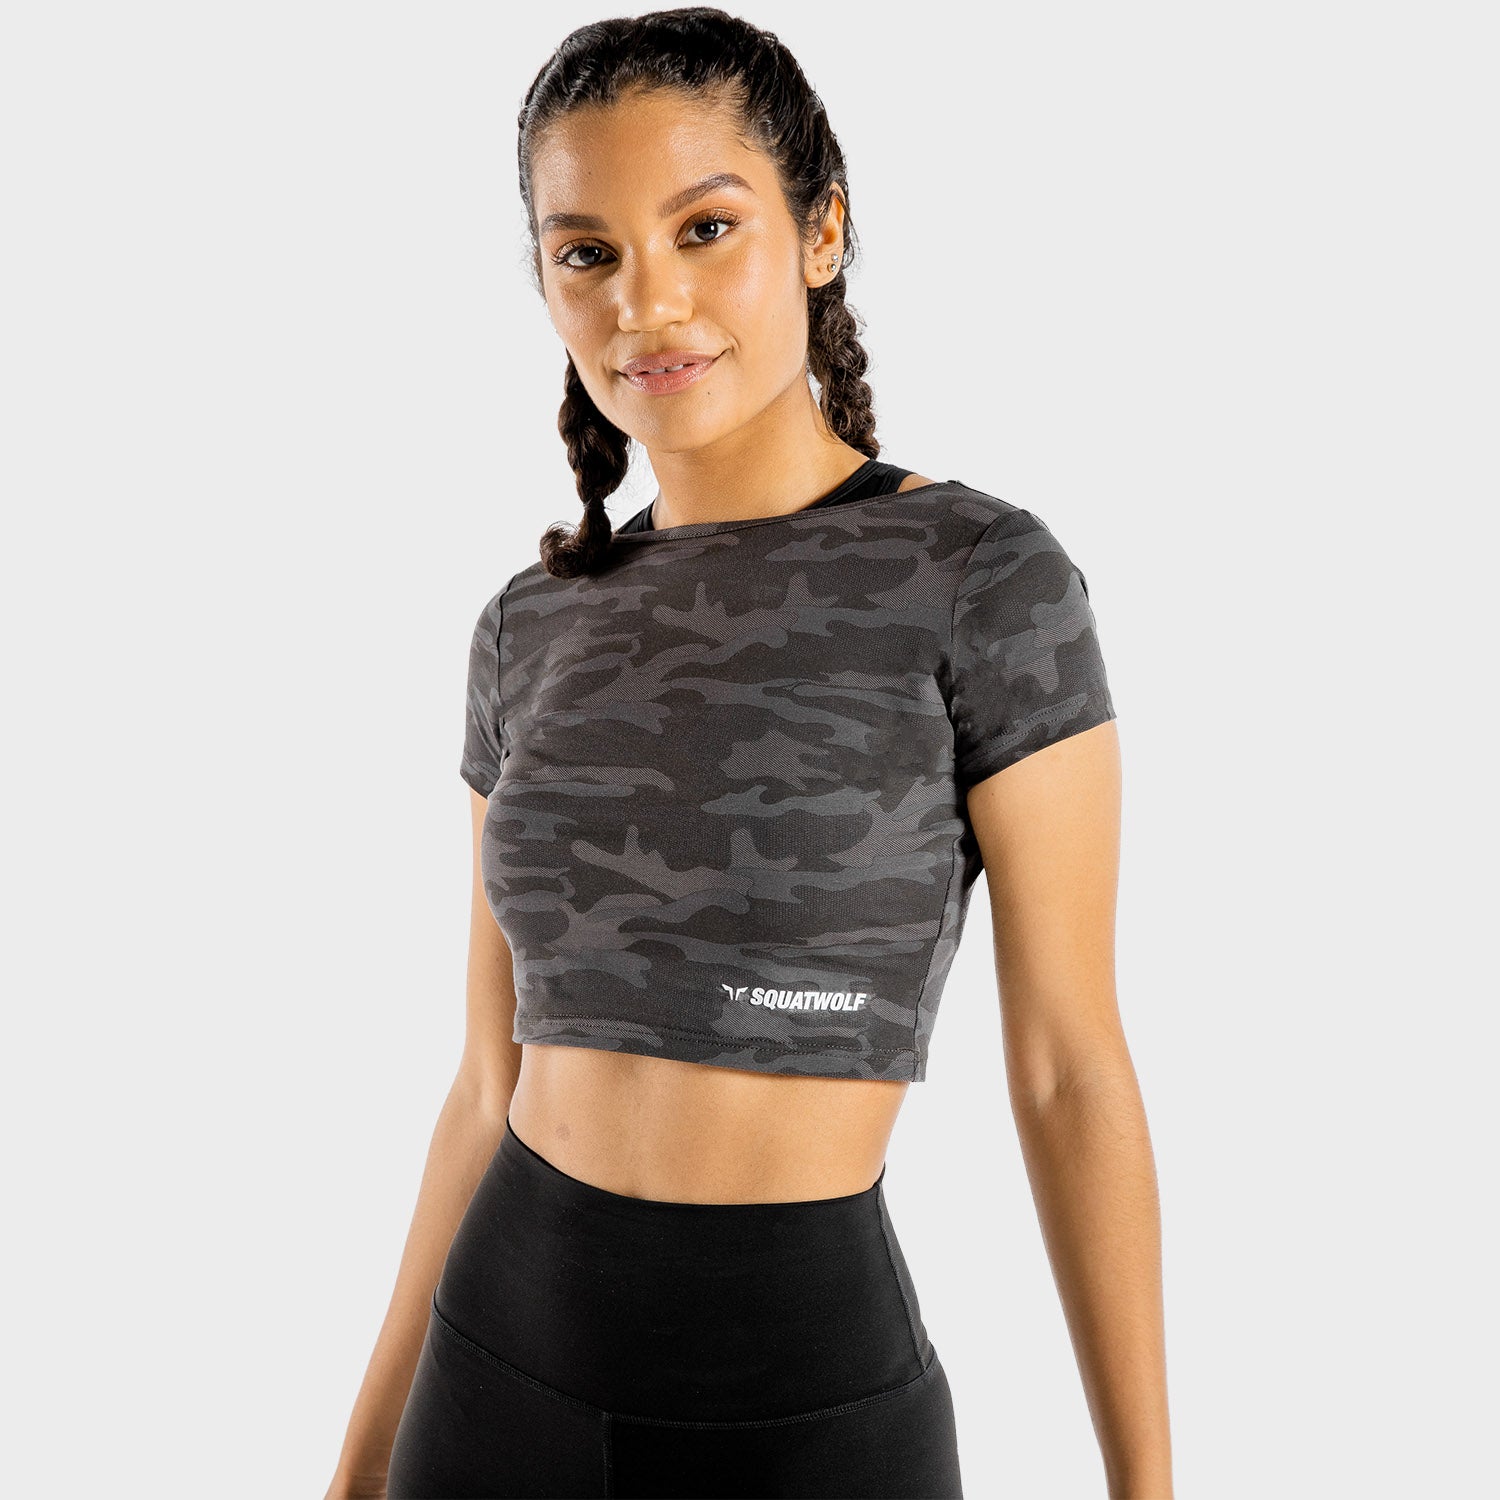 squatwolf-gym-t-shirts-for-women-warrior-crop-tee-half-sleeves-camo-workout-clothes